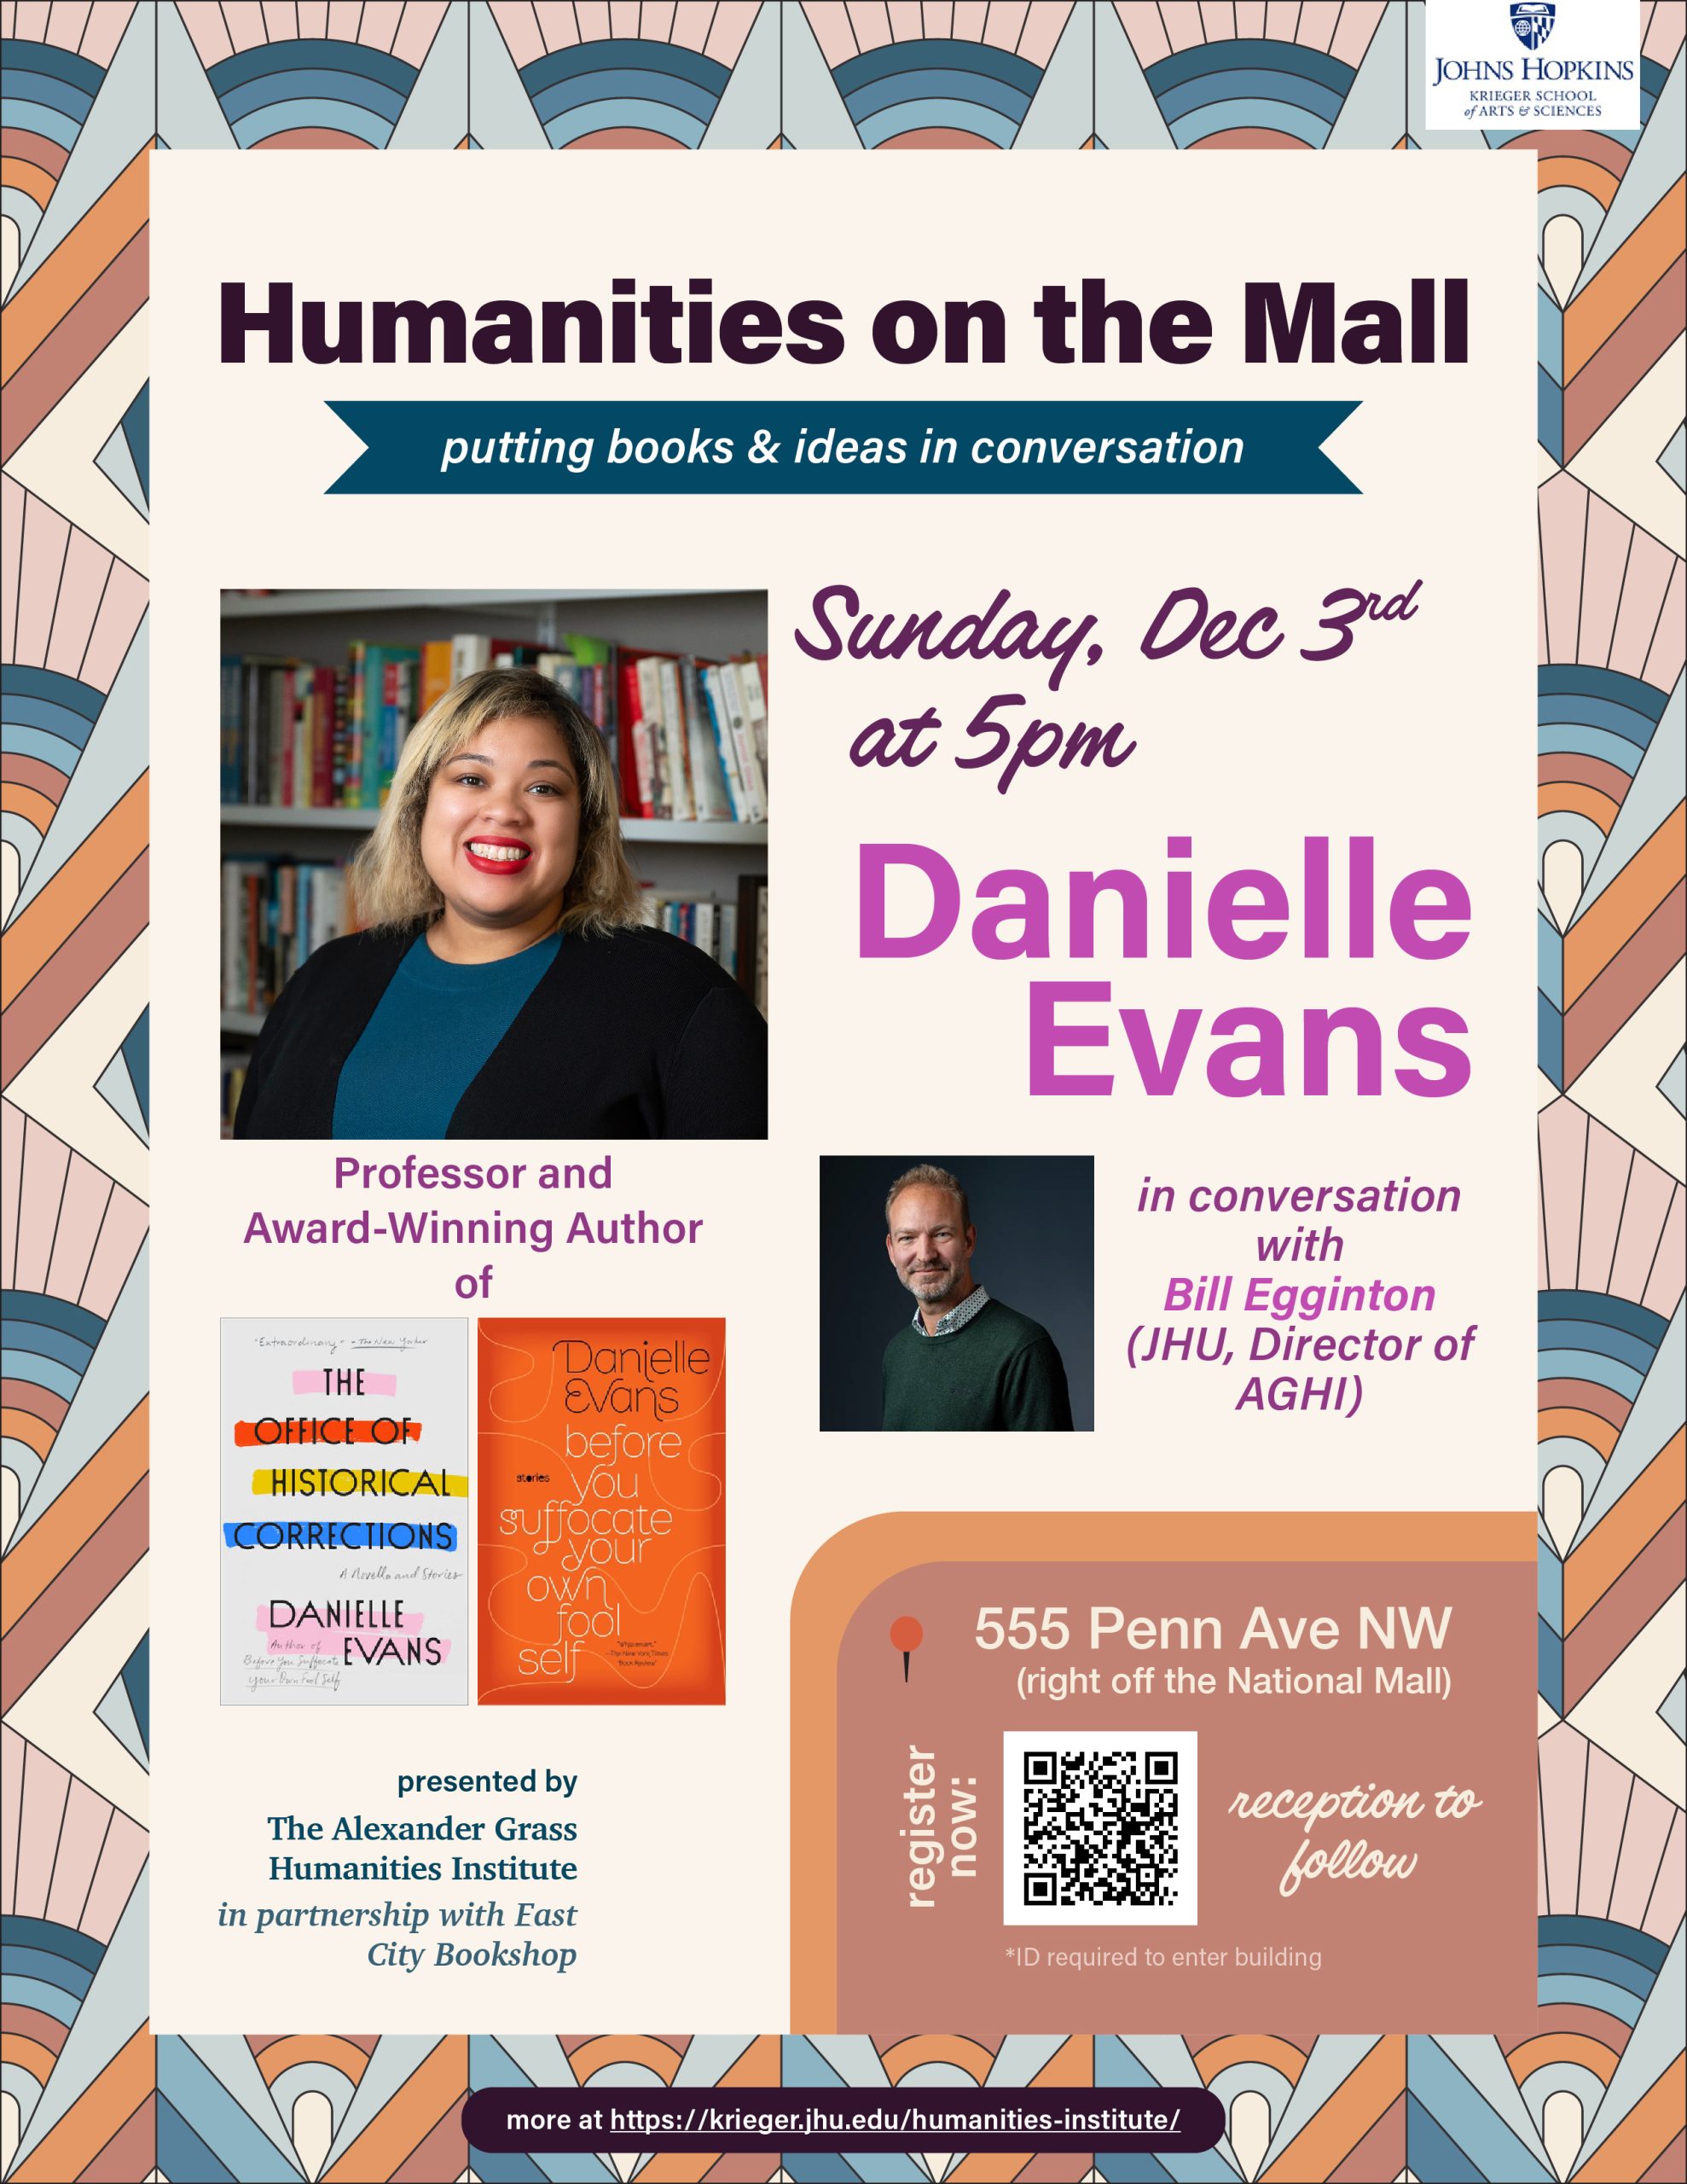 Humanities on the Mall featuring Danielle Evans on December 3rd.